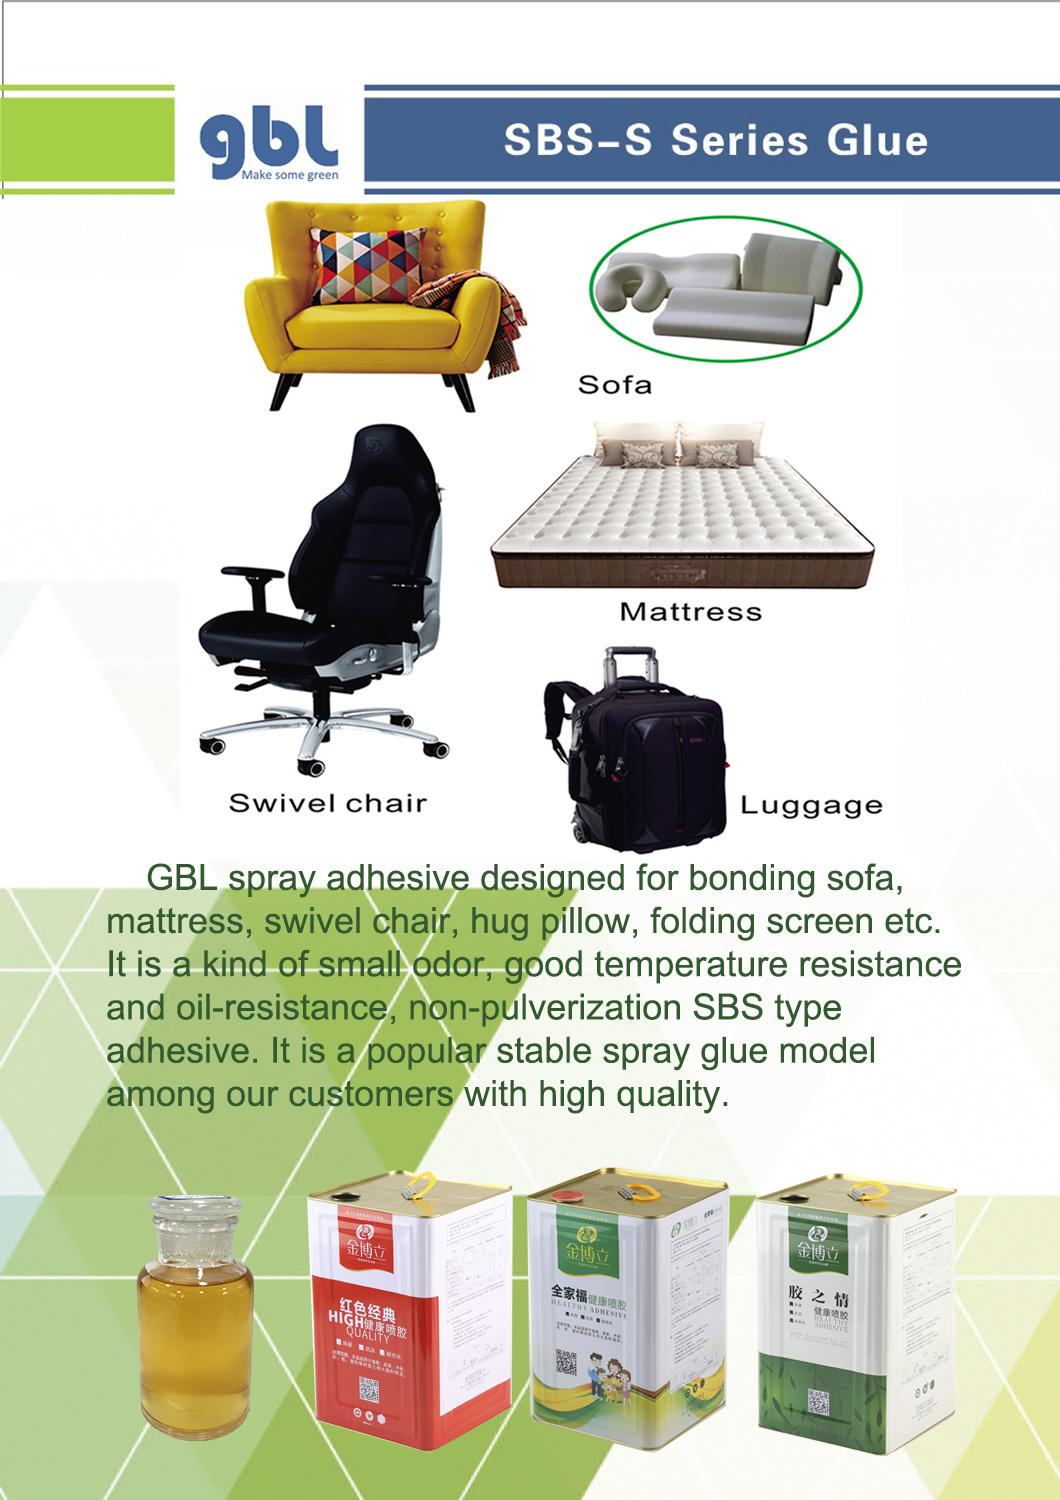 GBL Excellent Adhesion for Furniture Sbs Spray Glue